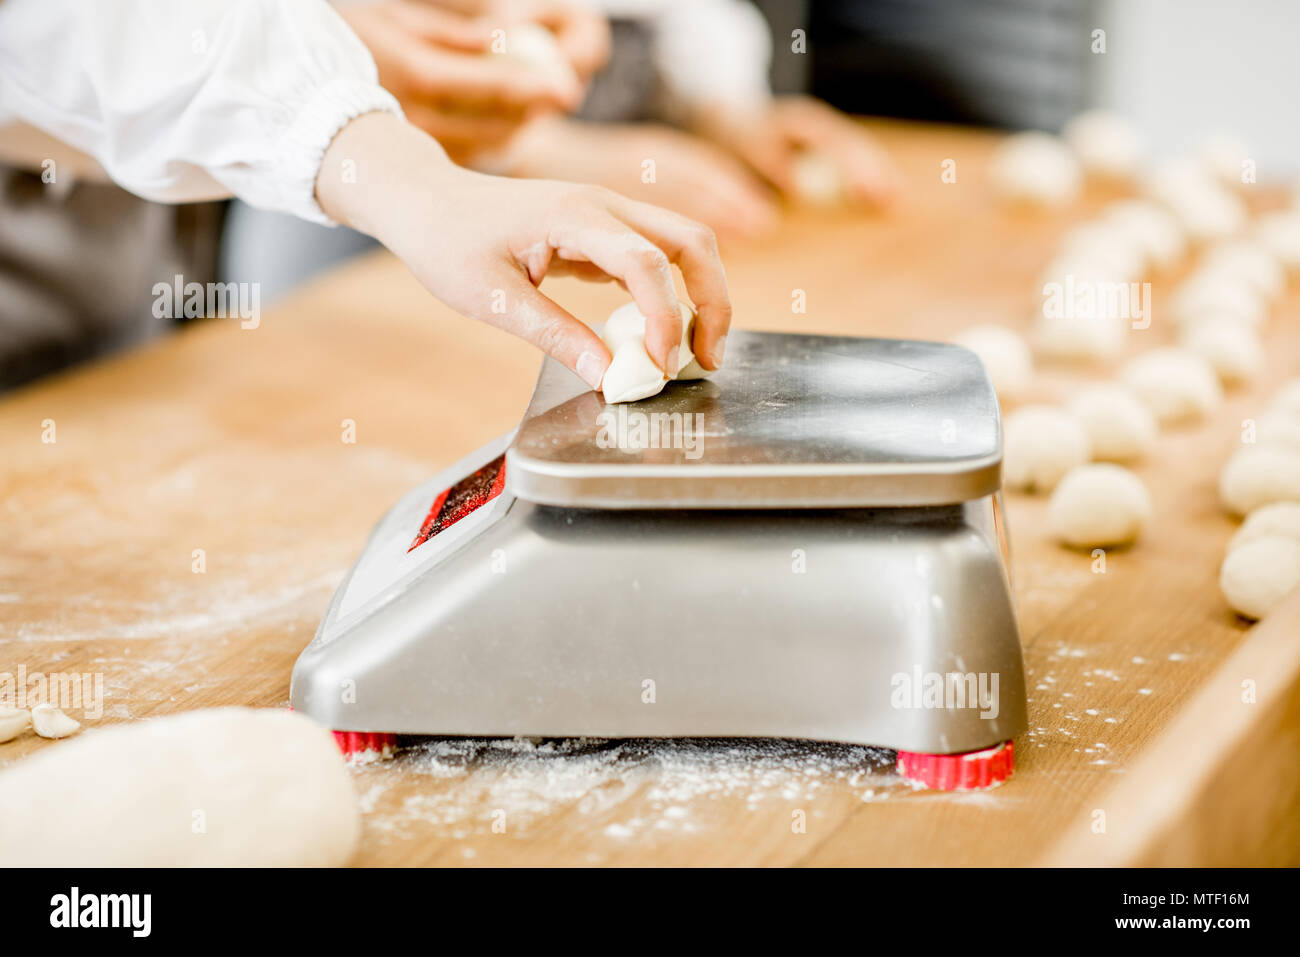 Baker weighing dough portions for baking buns at the manufacturig, close-up view Stock Photo